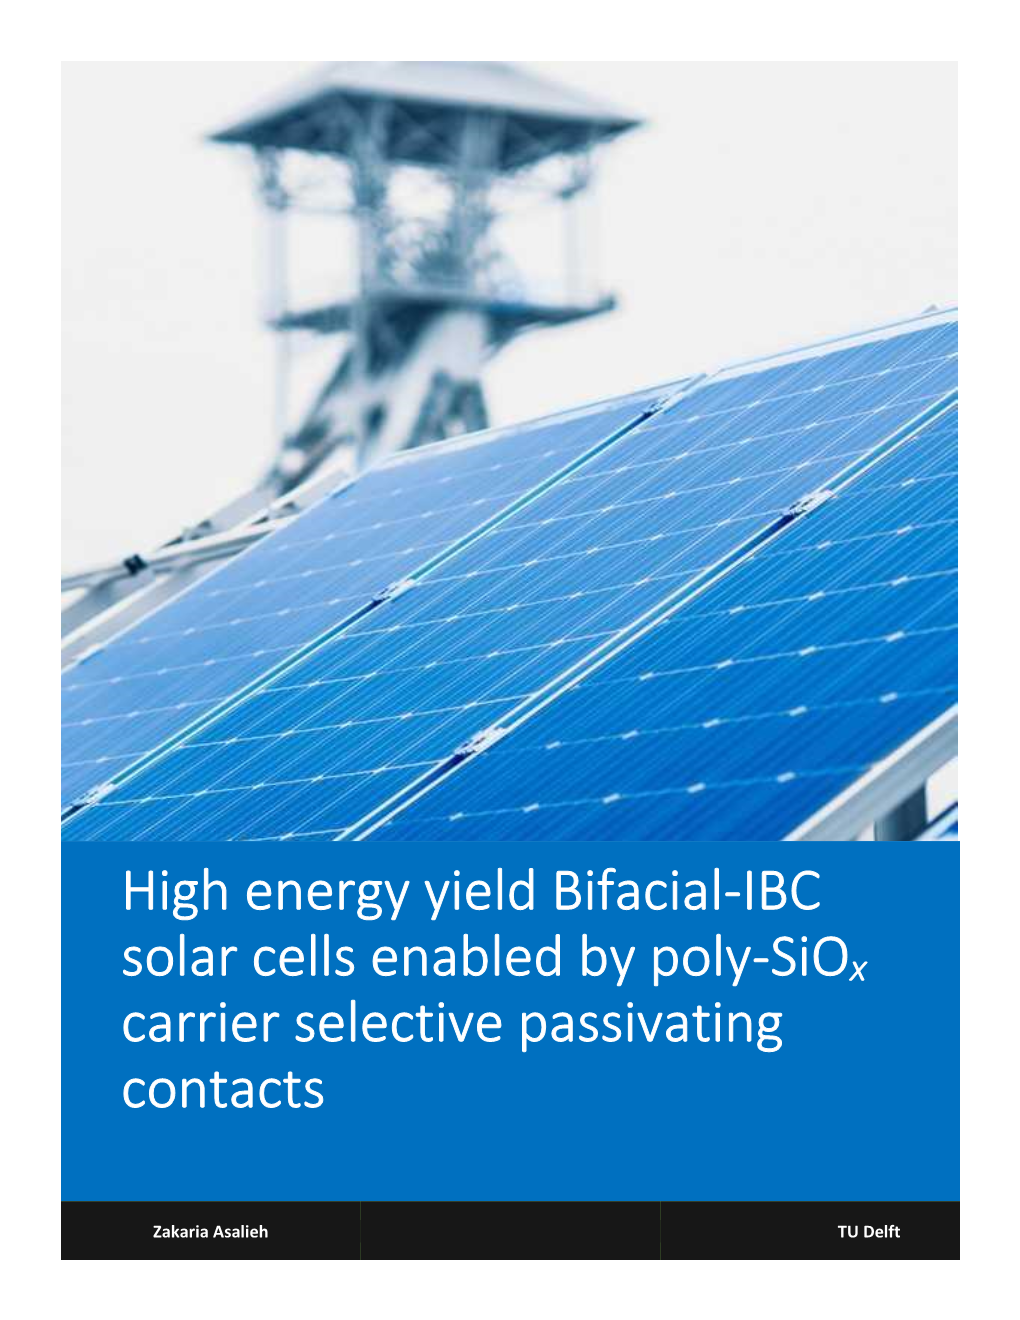 High Energy Yield Bifacial-IBC Solar Cells Enabled by Poly-Siox Carrier Selective Passivating Contacts